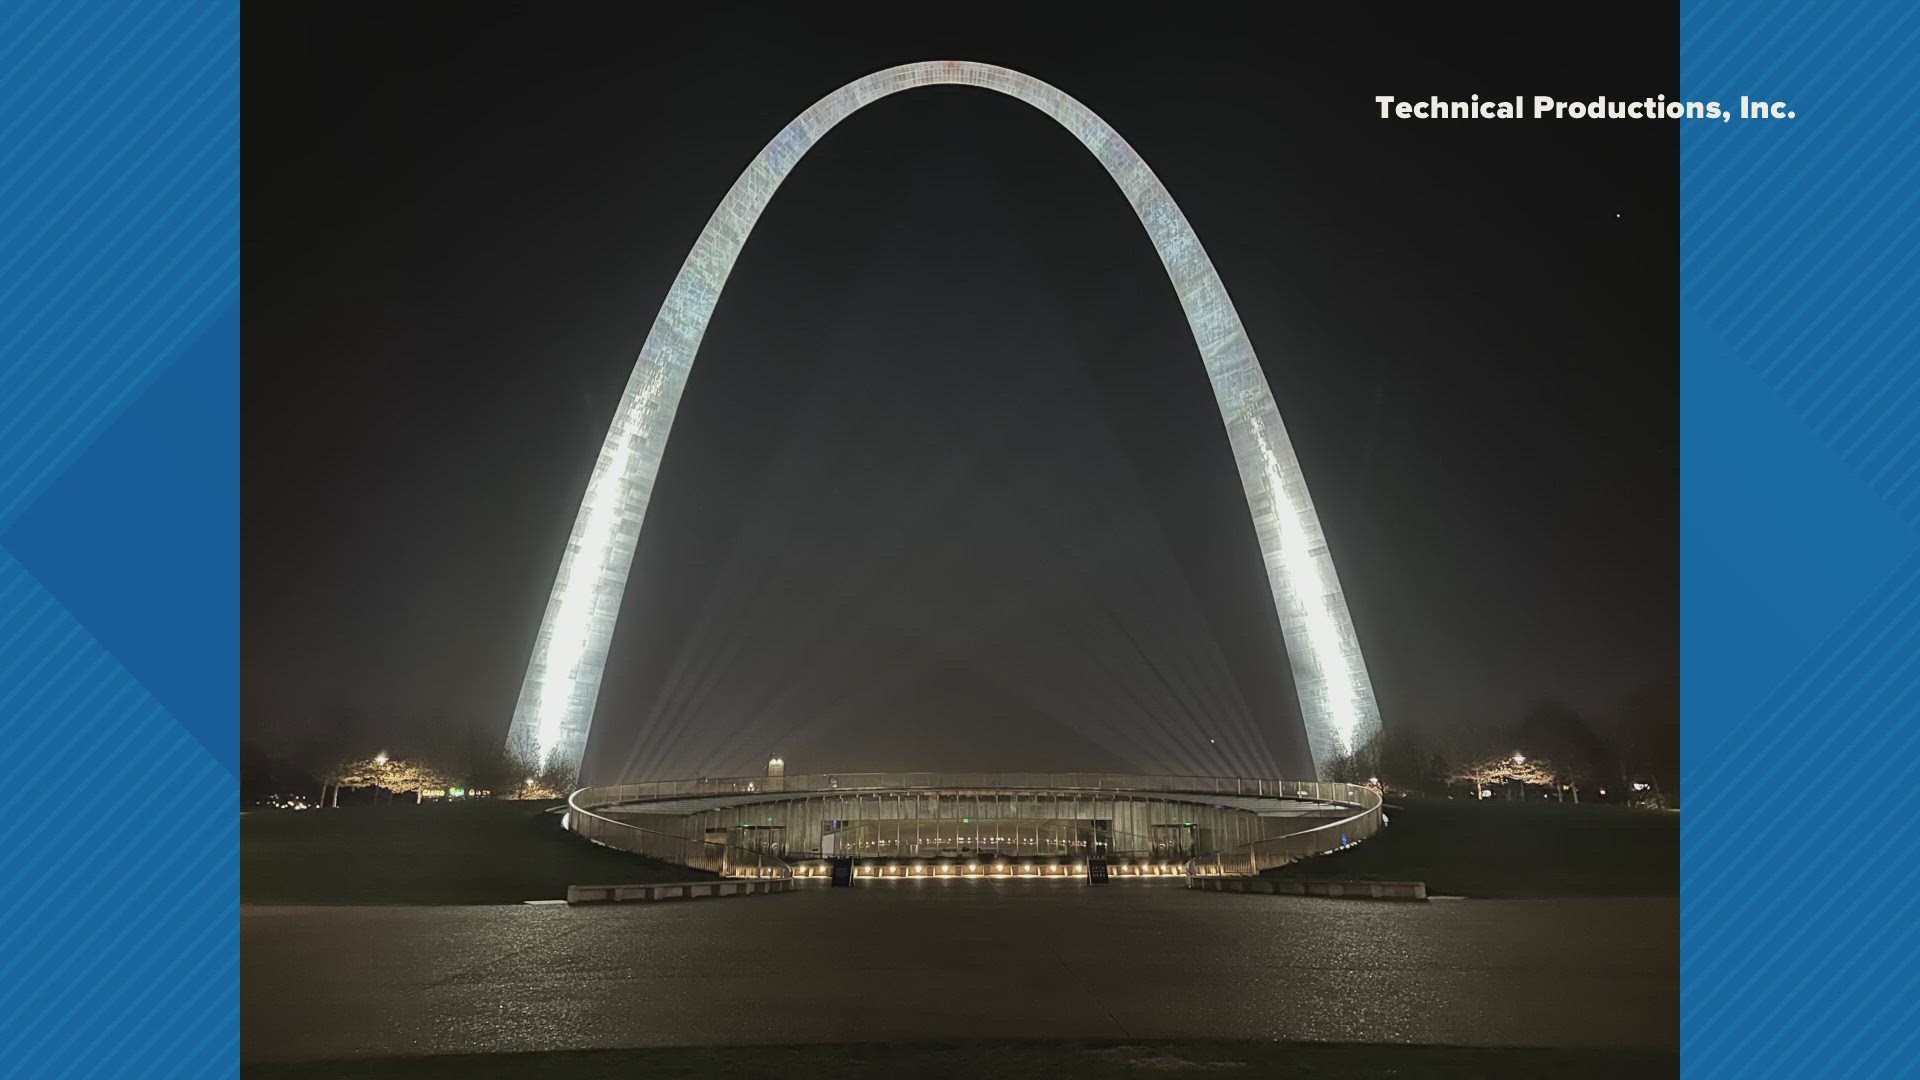 The Gateway Arch is getting a new lighting system that will be unveiled Tuesday night. The lights are new and improved.